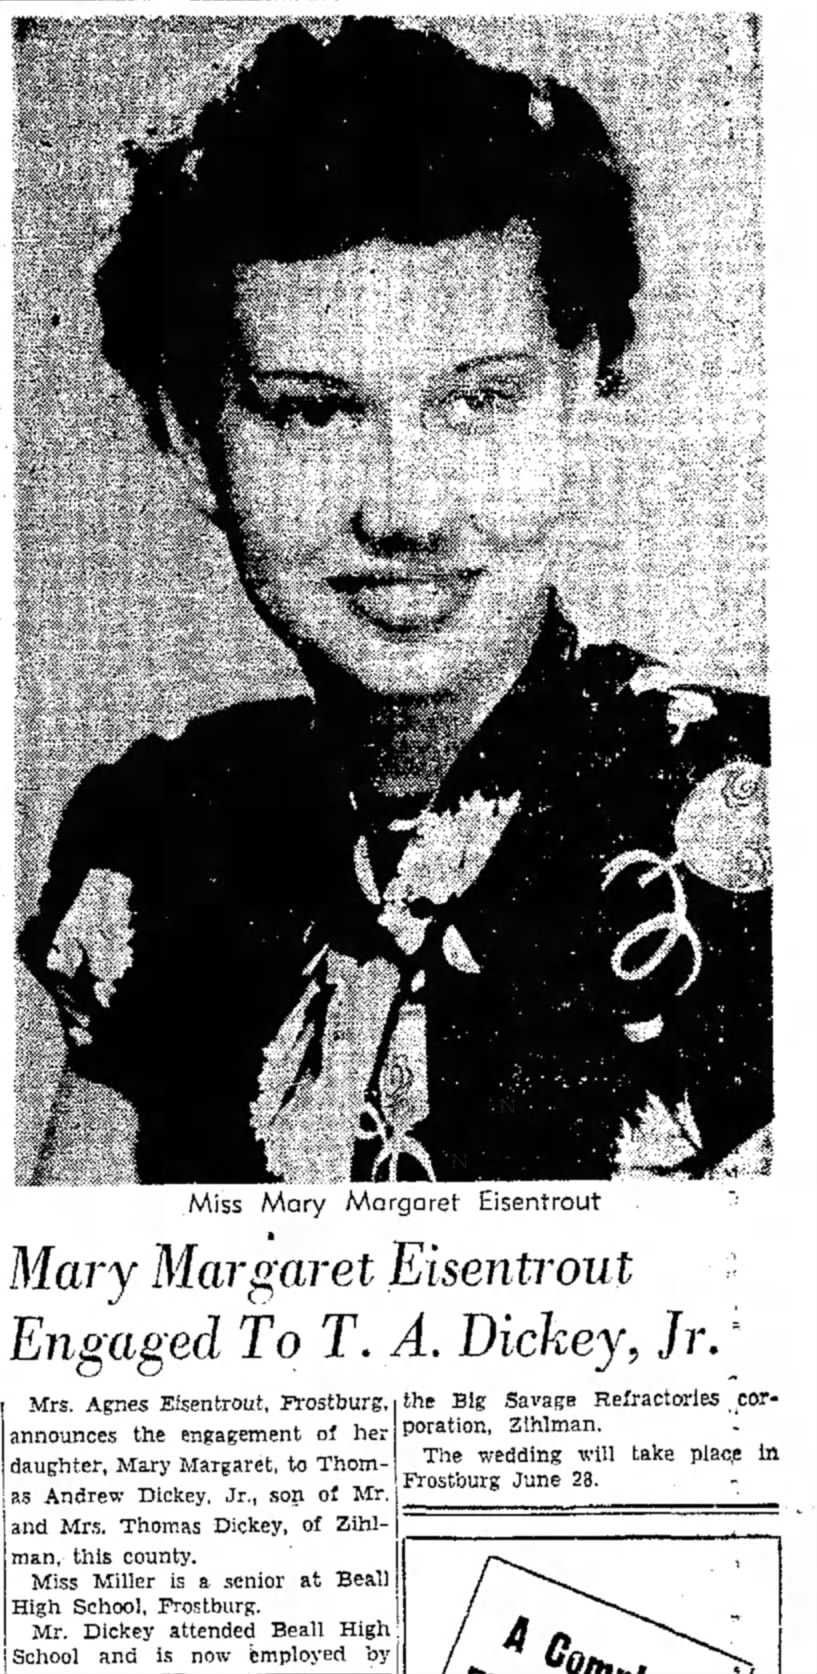 Mary Margaret Eisentrout (Duddy) Engaged to Thomas Dickey Jr. Wedding date set for June 28  1952